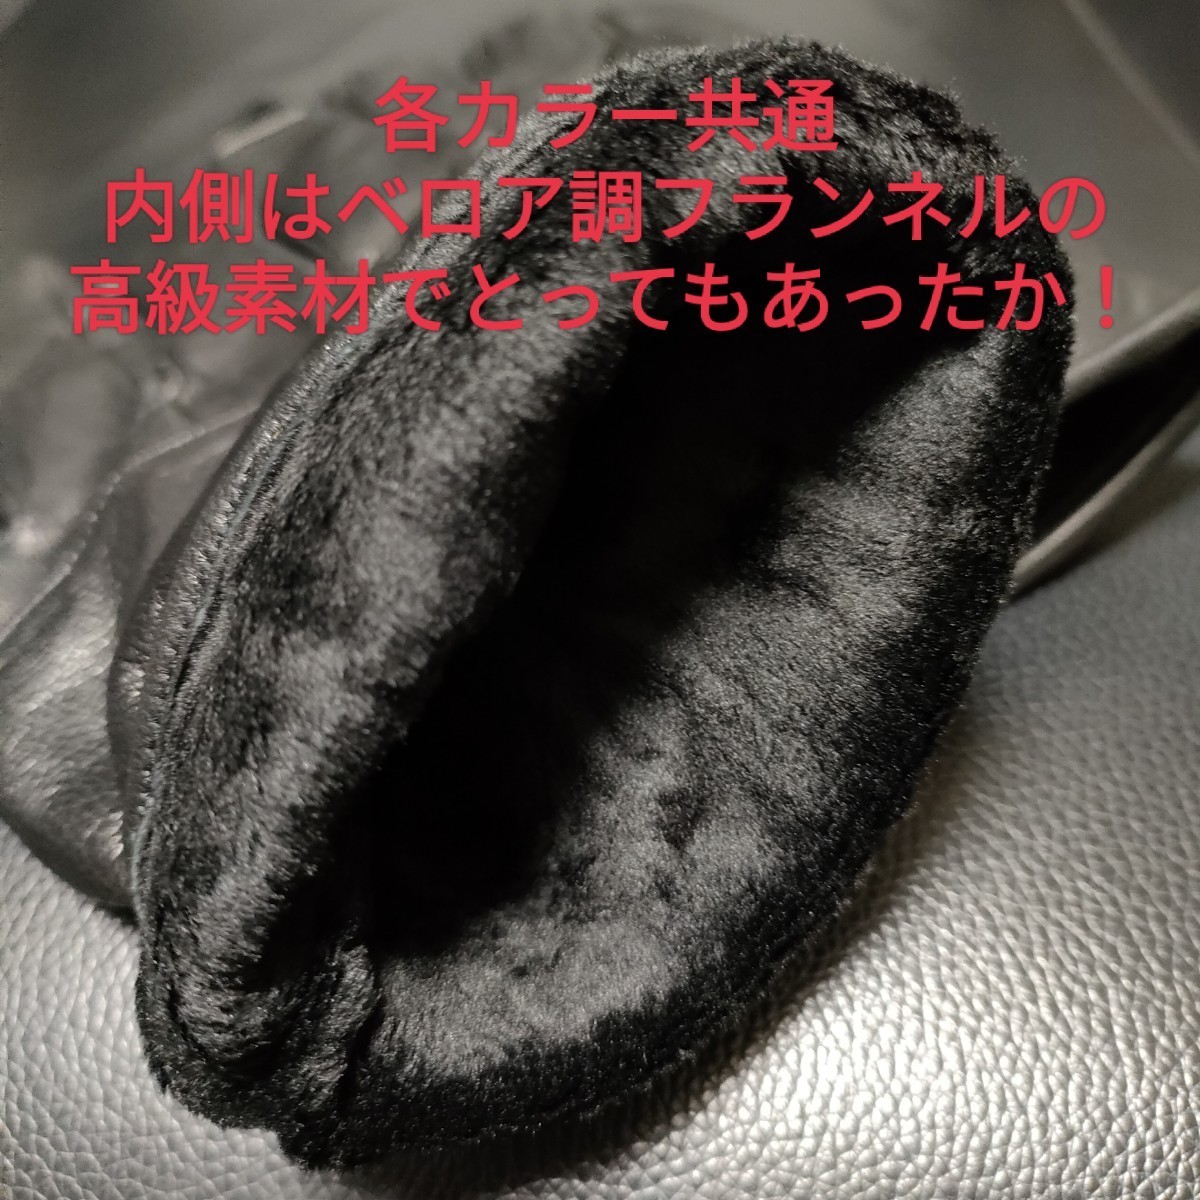  free shipping with translation article limit [ today limitation price cut ]4888-1500 high class ram leather lady's gloves new color. black navy blue L size 